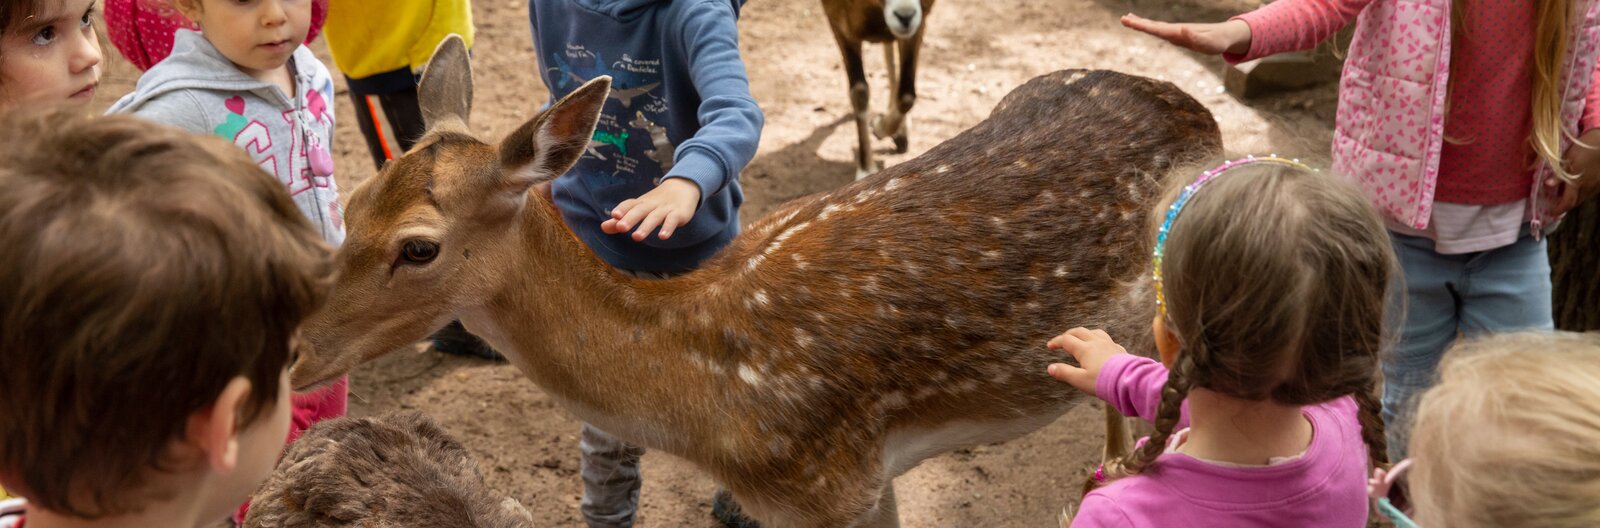 10 best petting zoos, wildlife parks and interactive farms in and around Budapest